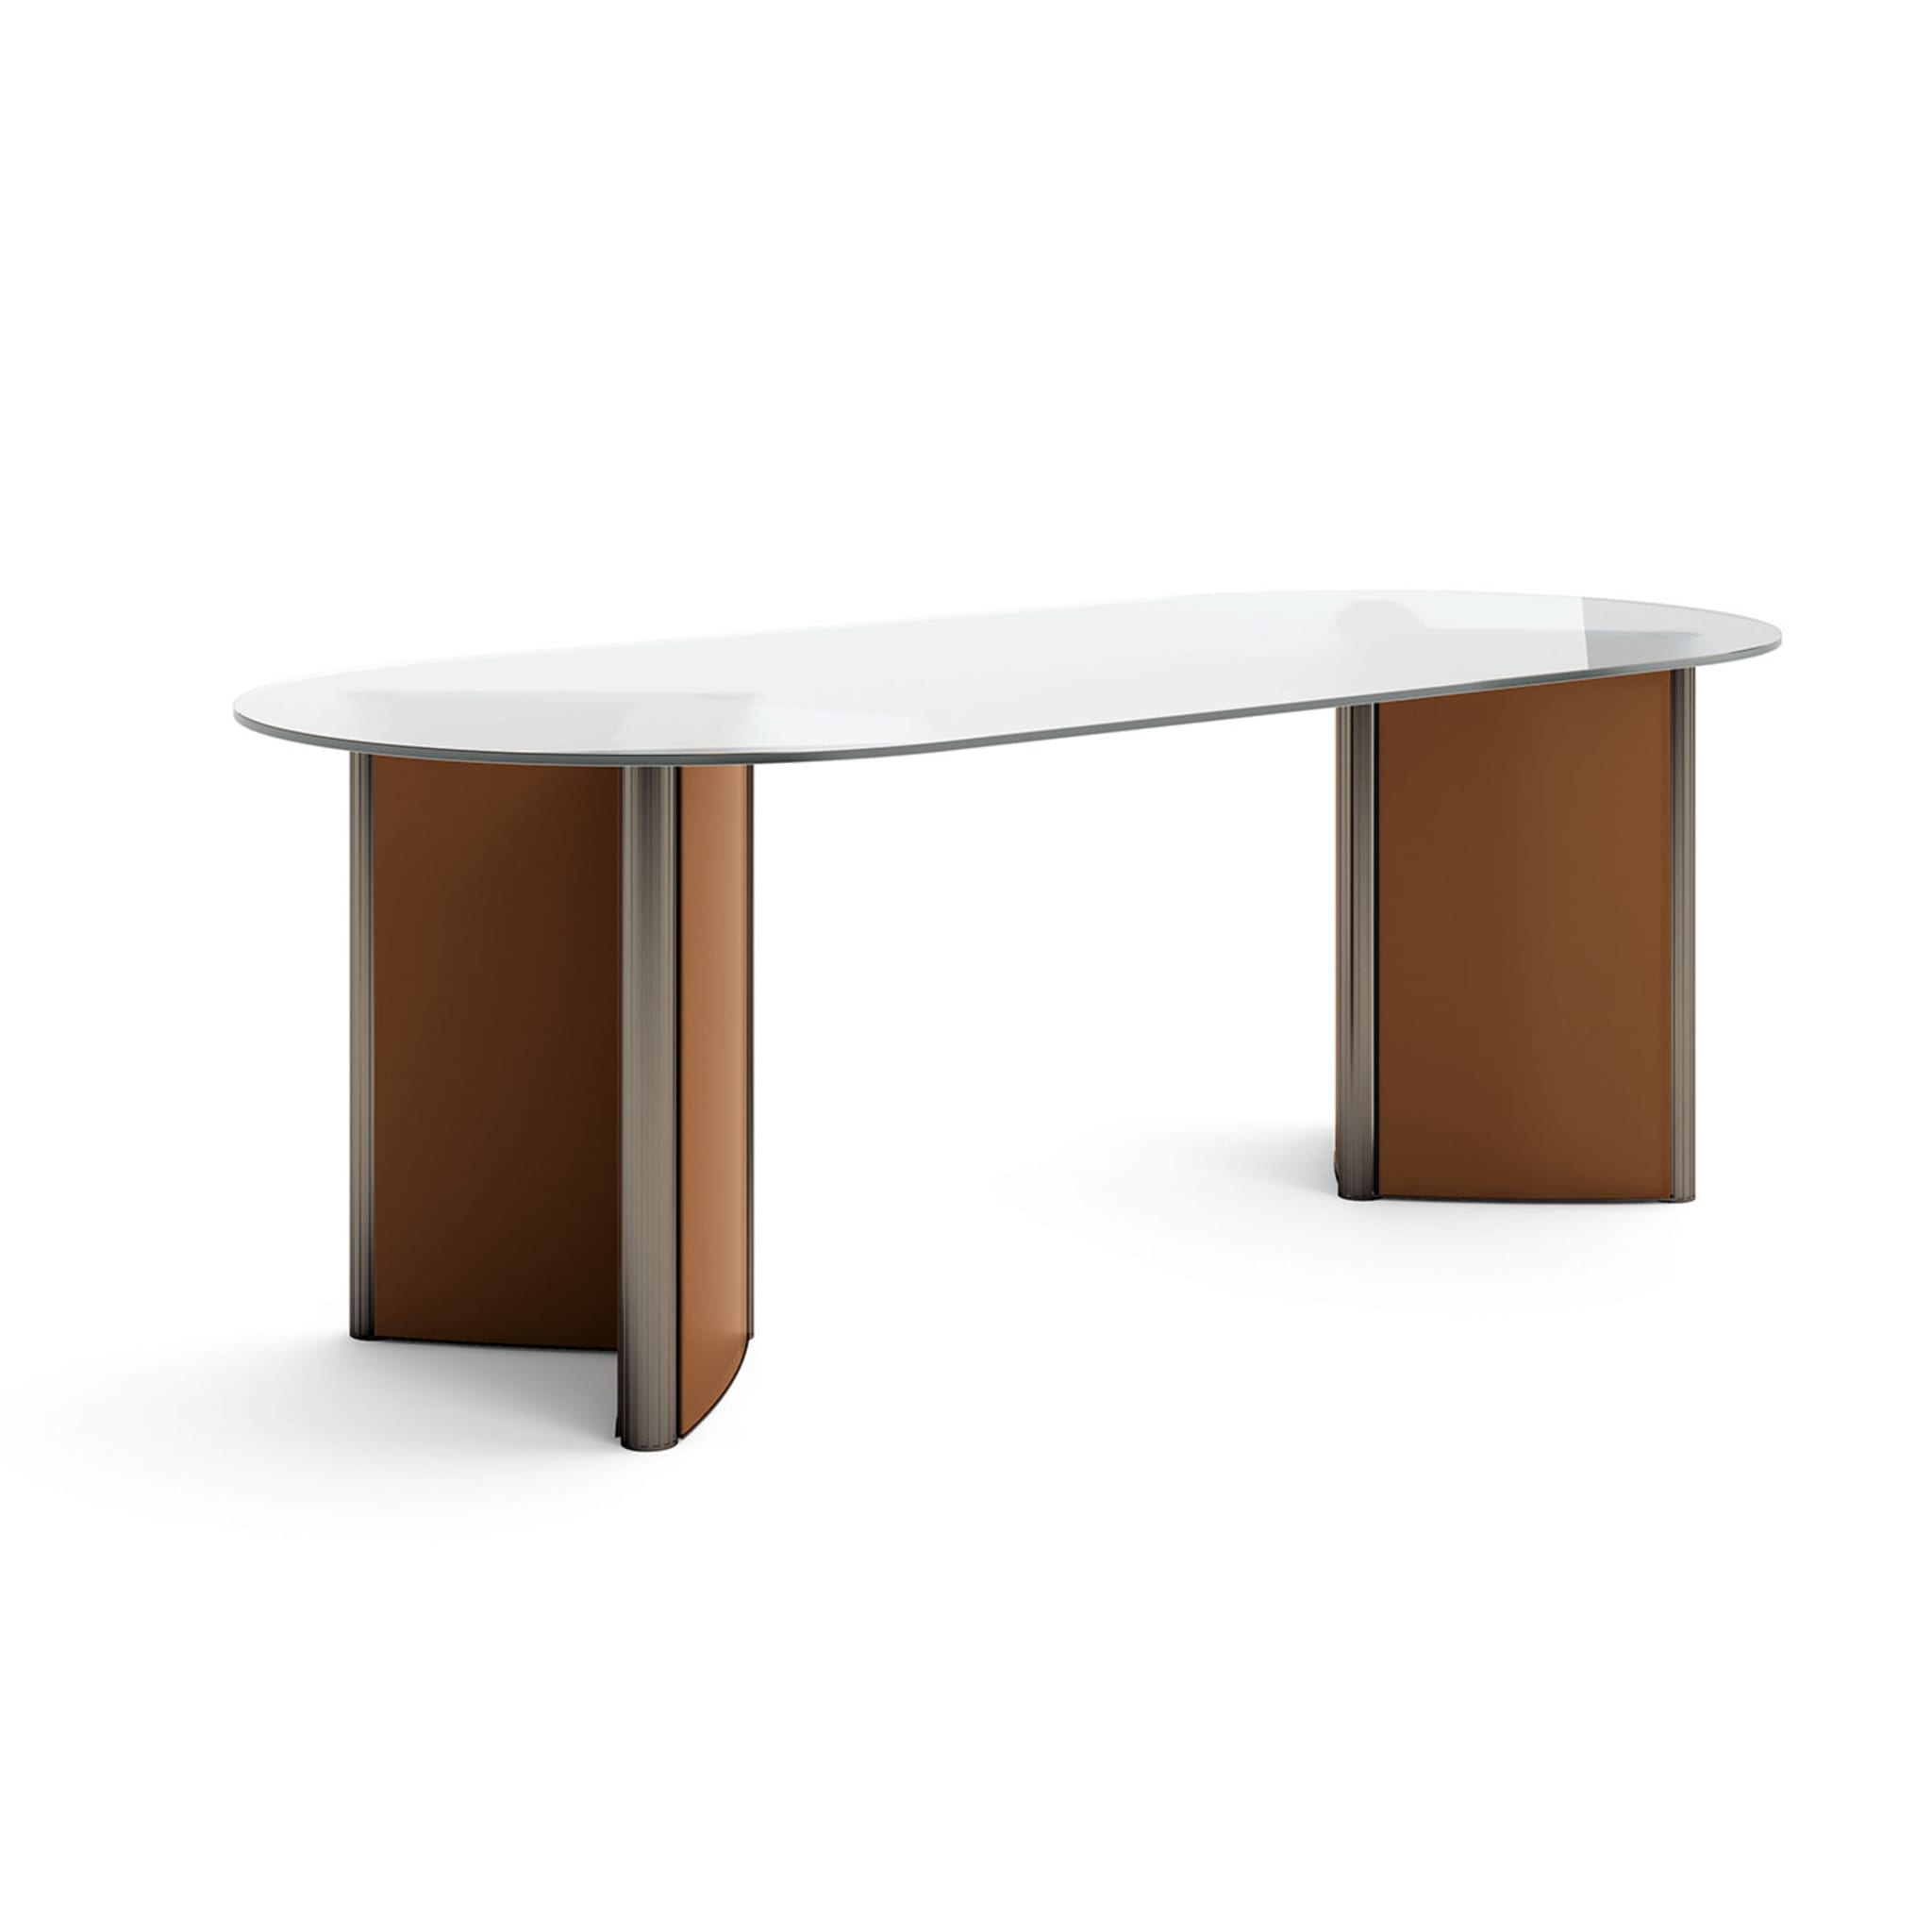 Valeo Meeting Table by Fauciglietti Engineering - Alternative view 1